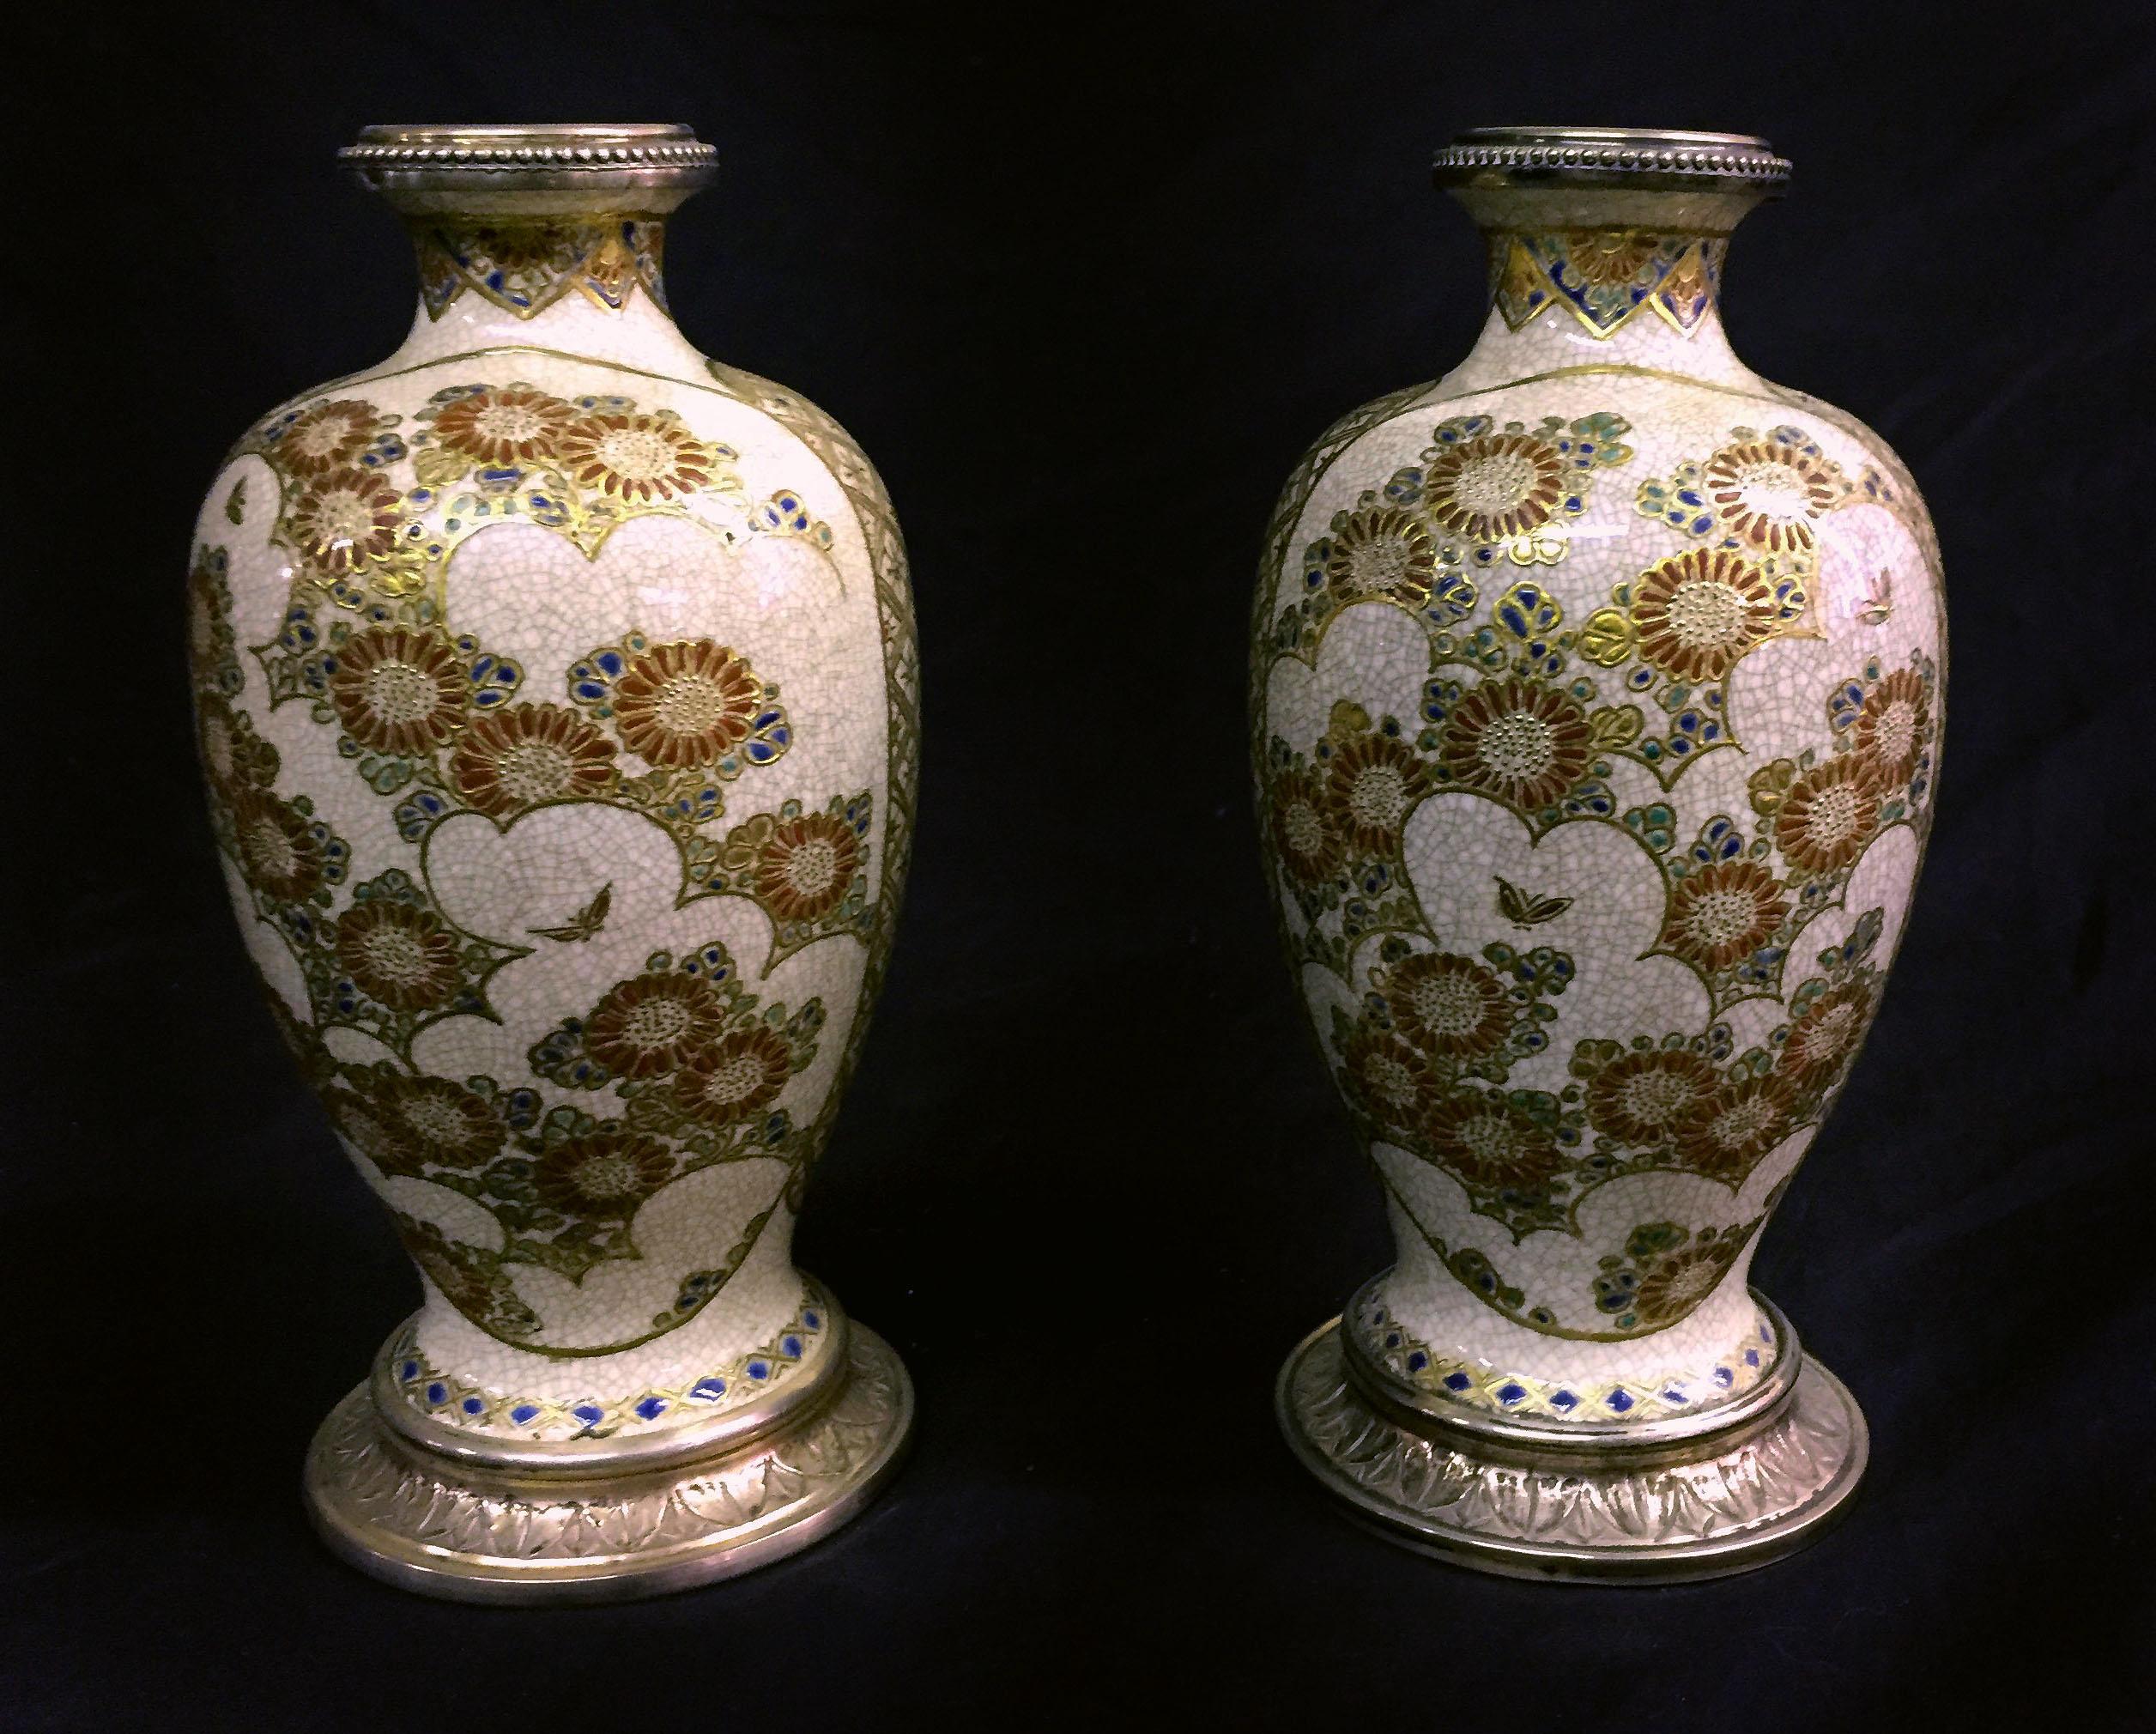 A nice pair of late 19th century silver mounted Japanese Satsuma porcelain vases.

The front panels painted with lion type figures, the back panels with flowers and butterflies, the entire vase with raised gold designs.